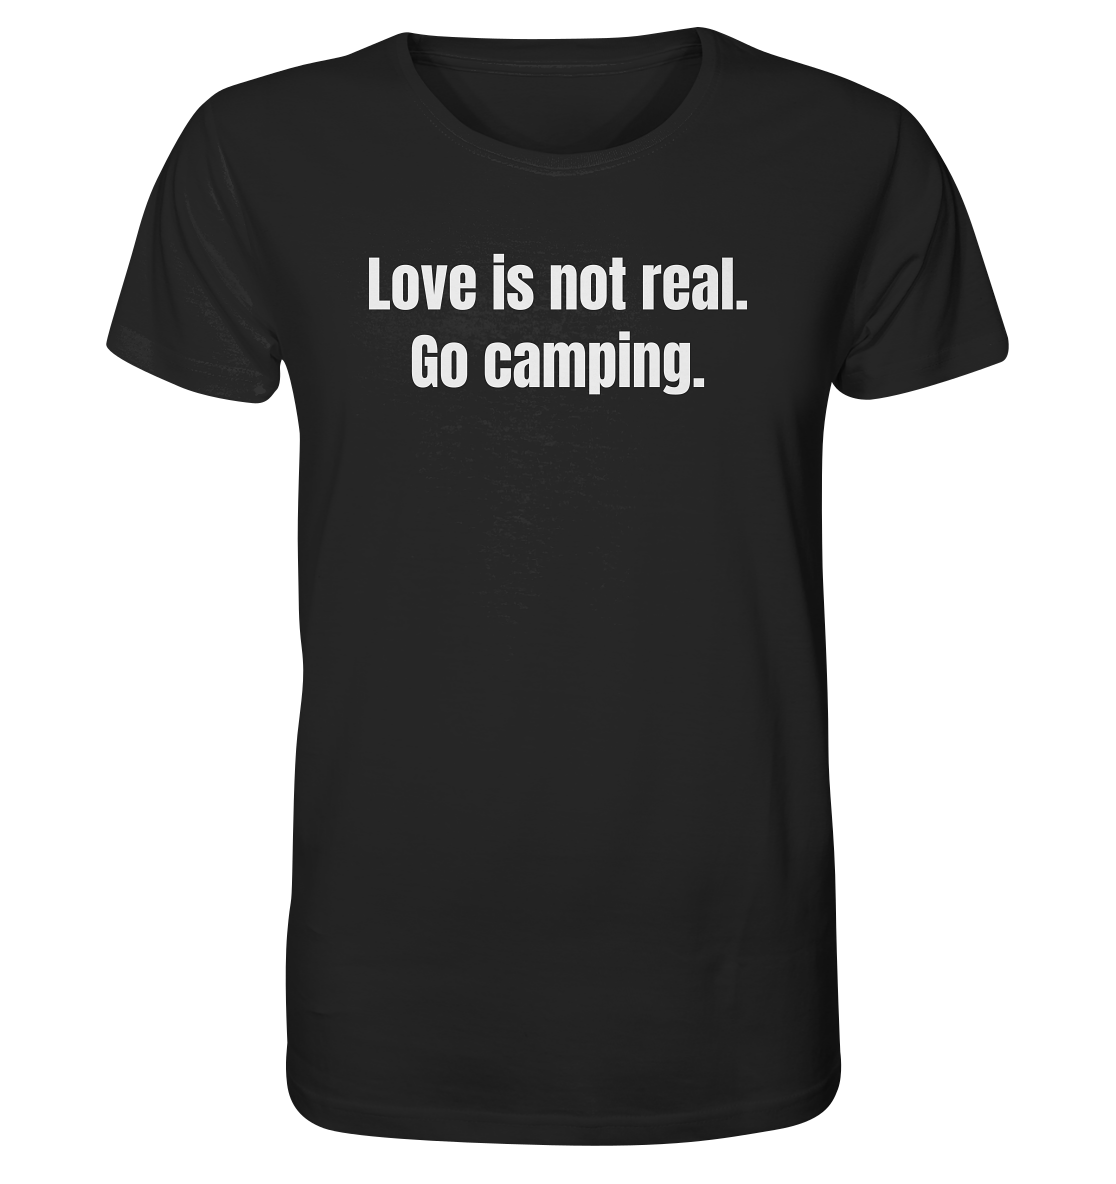 Love is not real. Go camping. - Organic Shirt